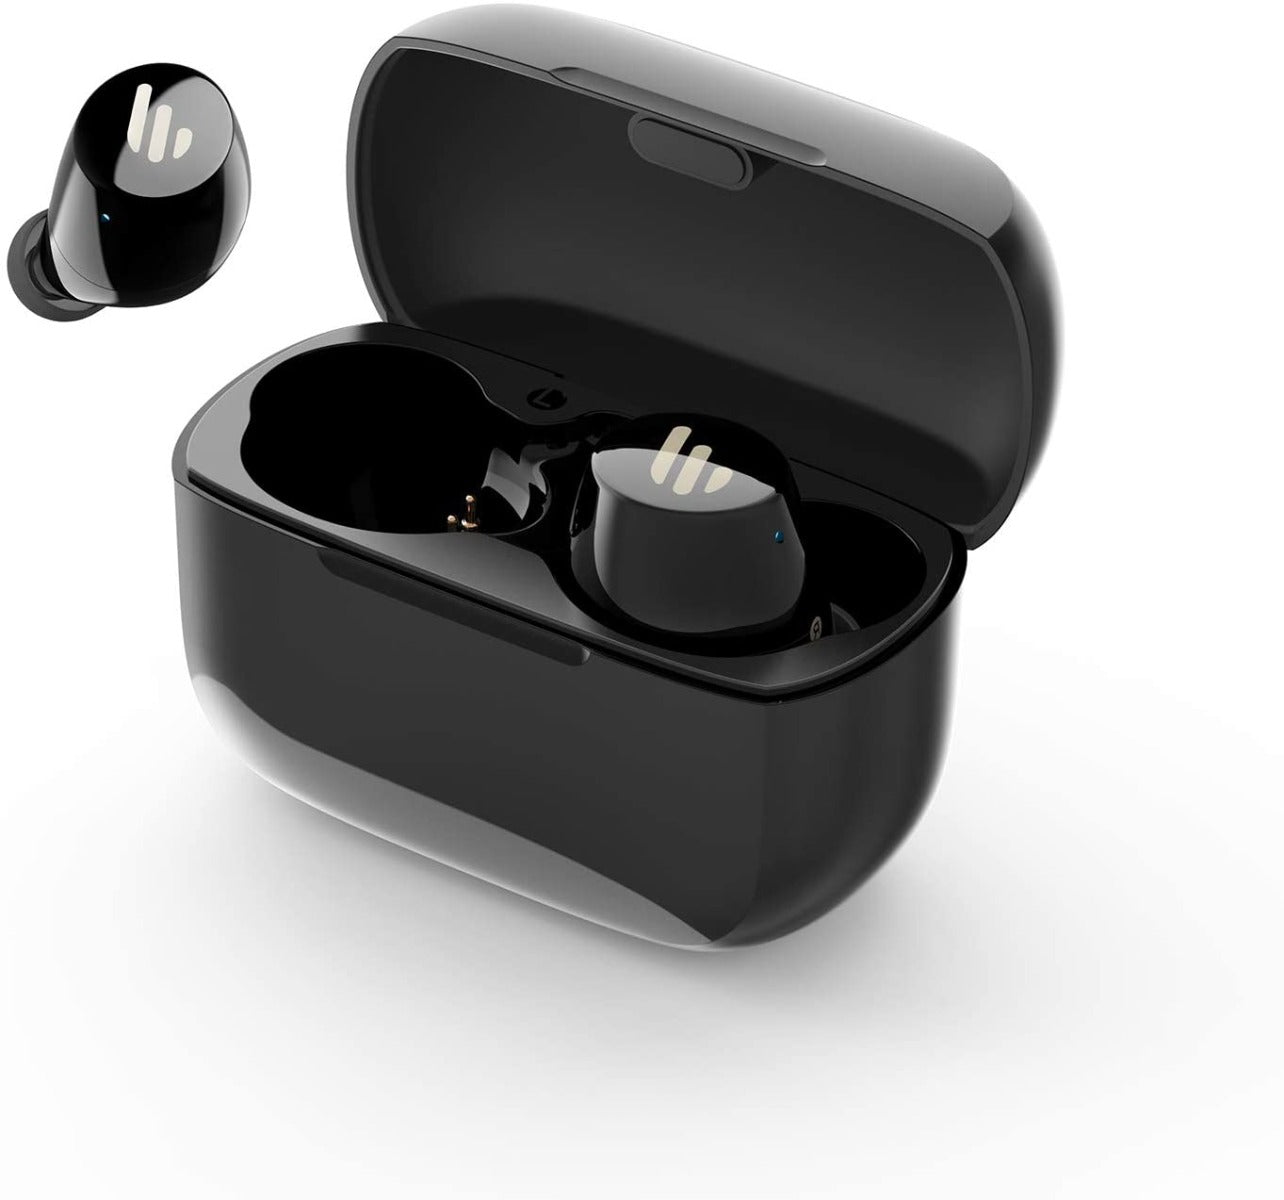 Edifier Edifier TWS1 True Wireless Earbuds - Up to 32 Hour Battery Life with Charging Case and Mic, Bluetooth v5.0 aptX, IPX5 Splash & Sweatproof, Easy Pairing - Black Speakers